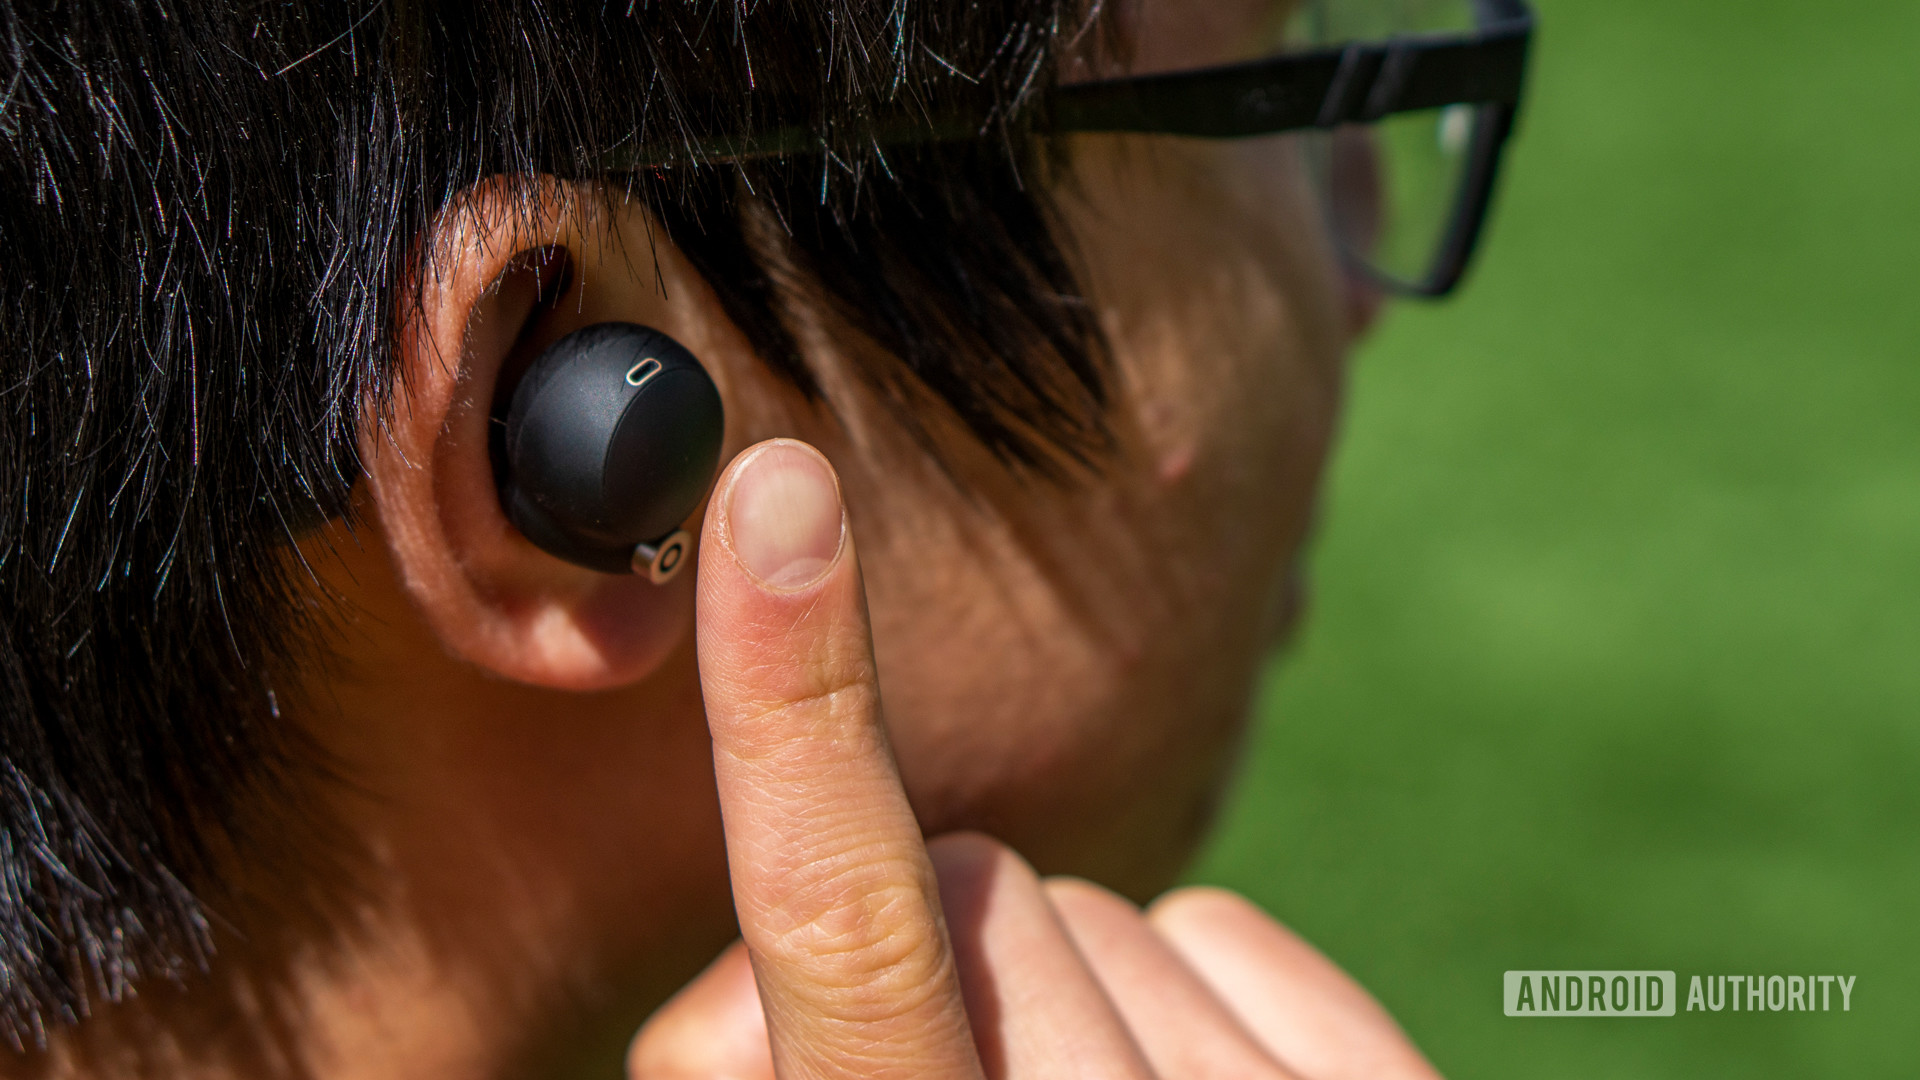 A woman putting her finger up to the Sony WF-1000XM4 earbud.